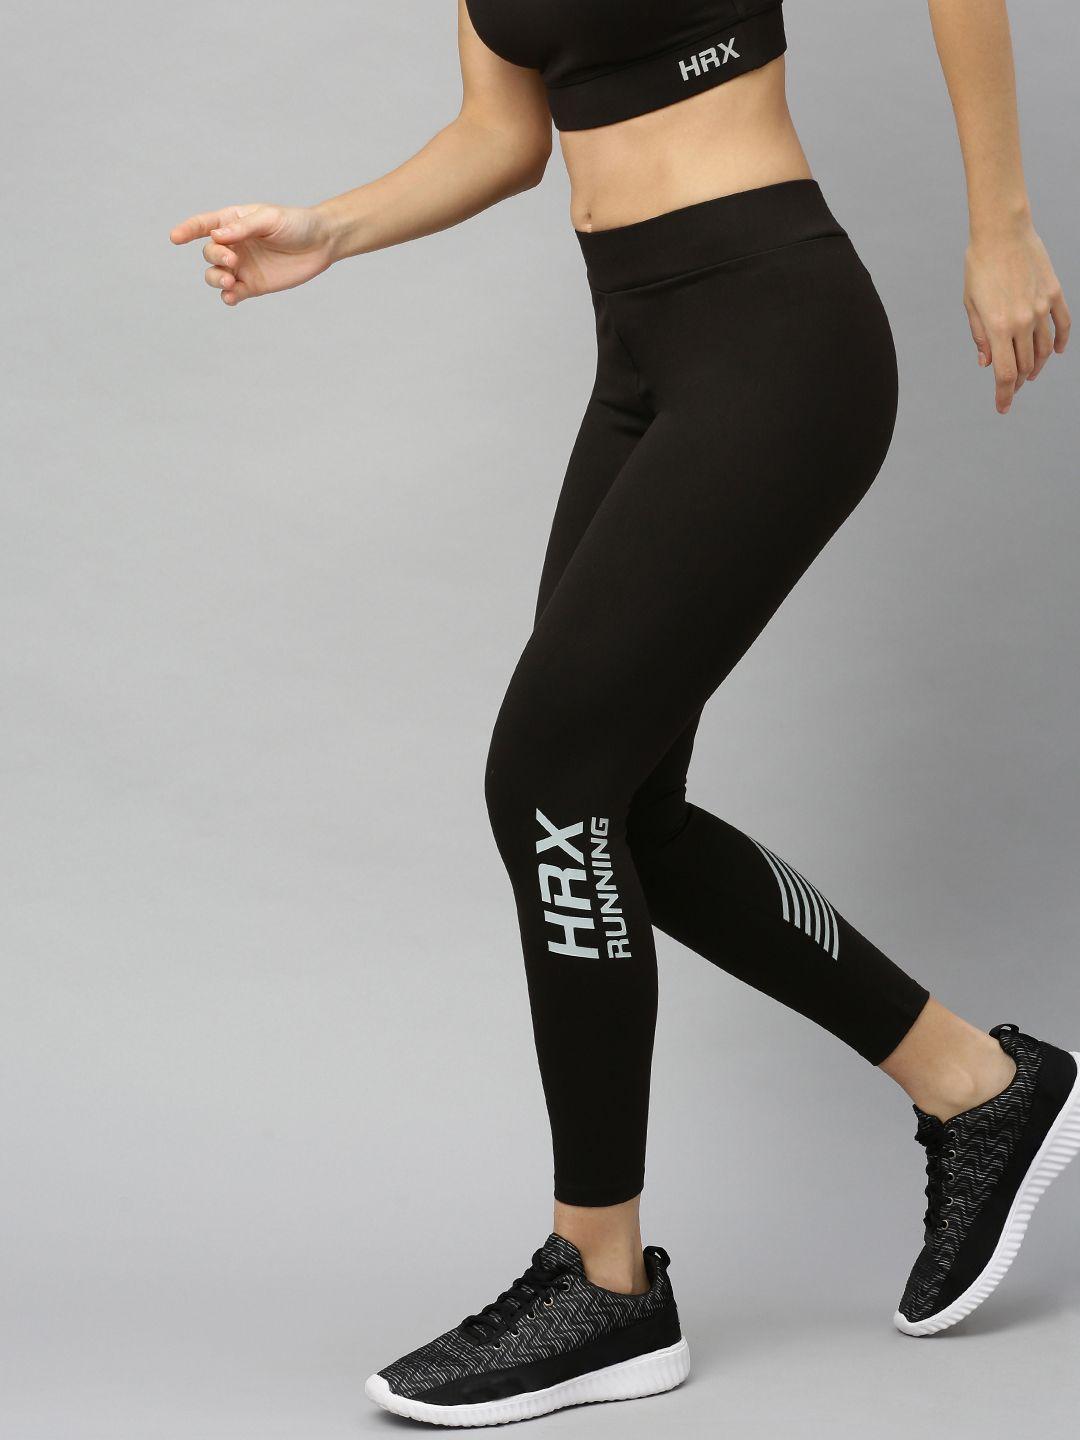 hrx by hrithik roshan women jet black solid rapid-dry n9 antimicrobial technology running tights